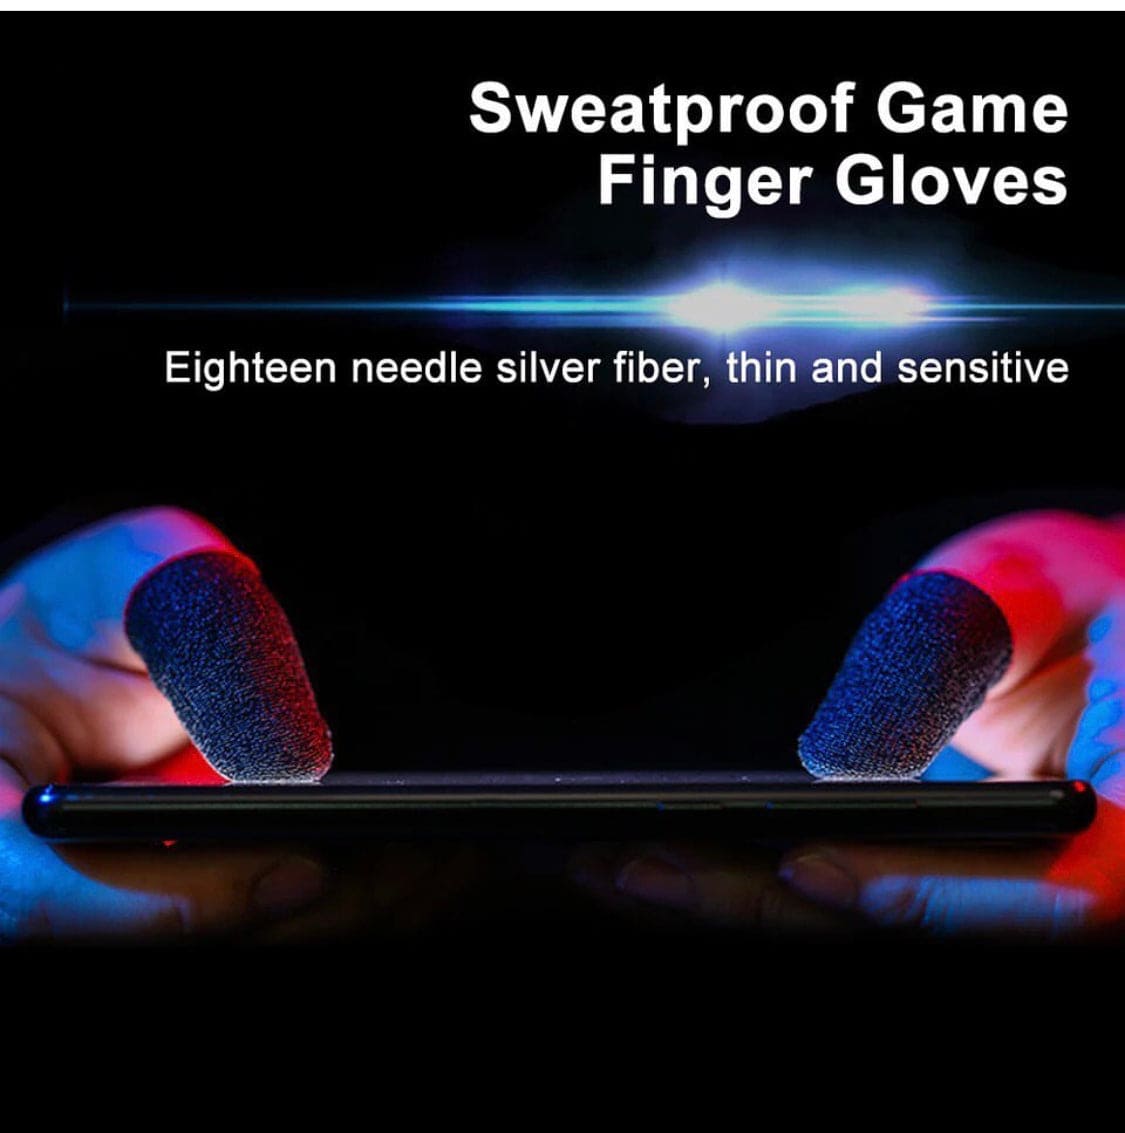 1 Pair Finger Sleeves For Gaming, Sweatproof Gloves Breathable Fingertips For Mobile Games, Non-Scratch Sensitive Touch Screen Gaming Finger Thumb Sleeve Gloves